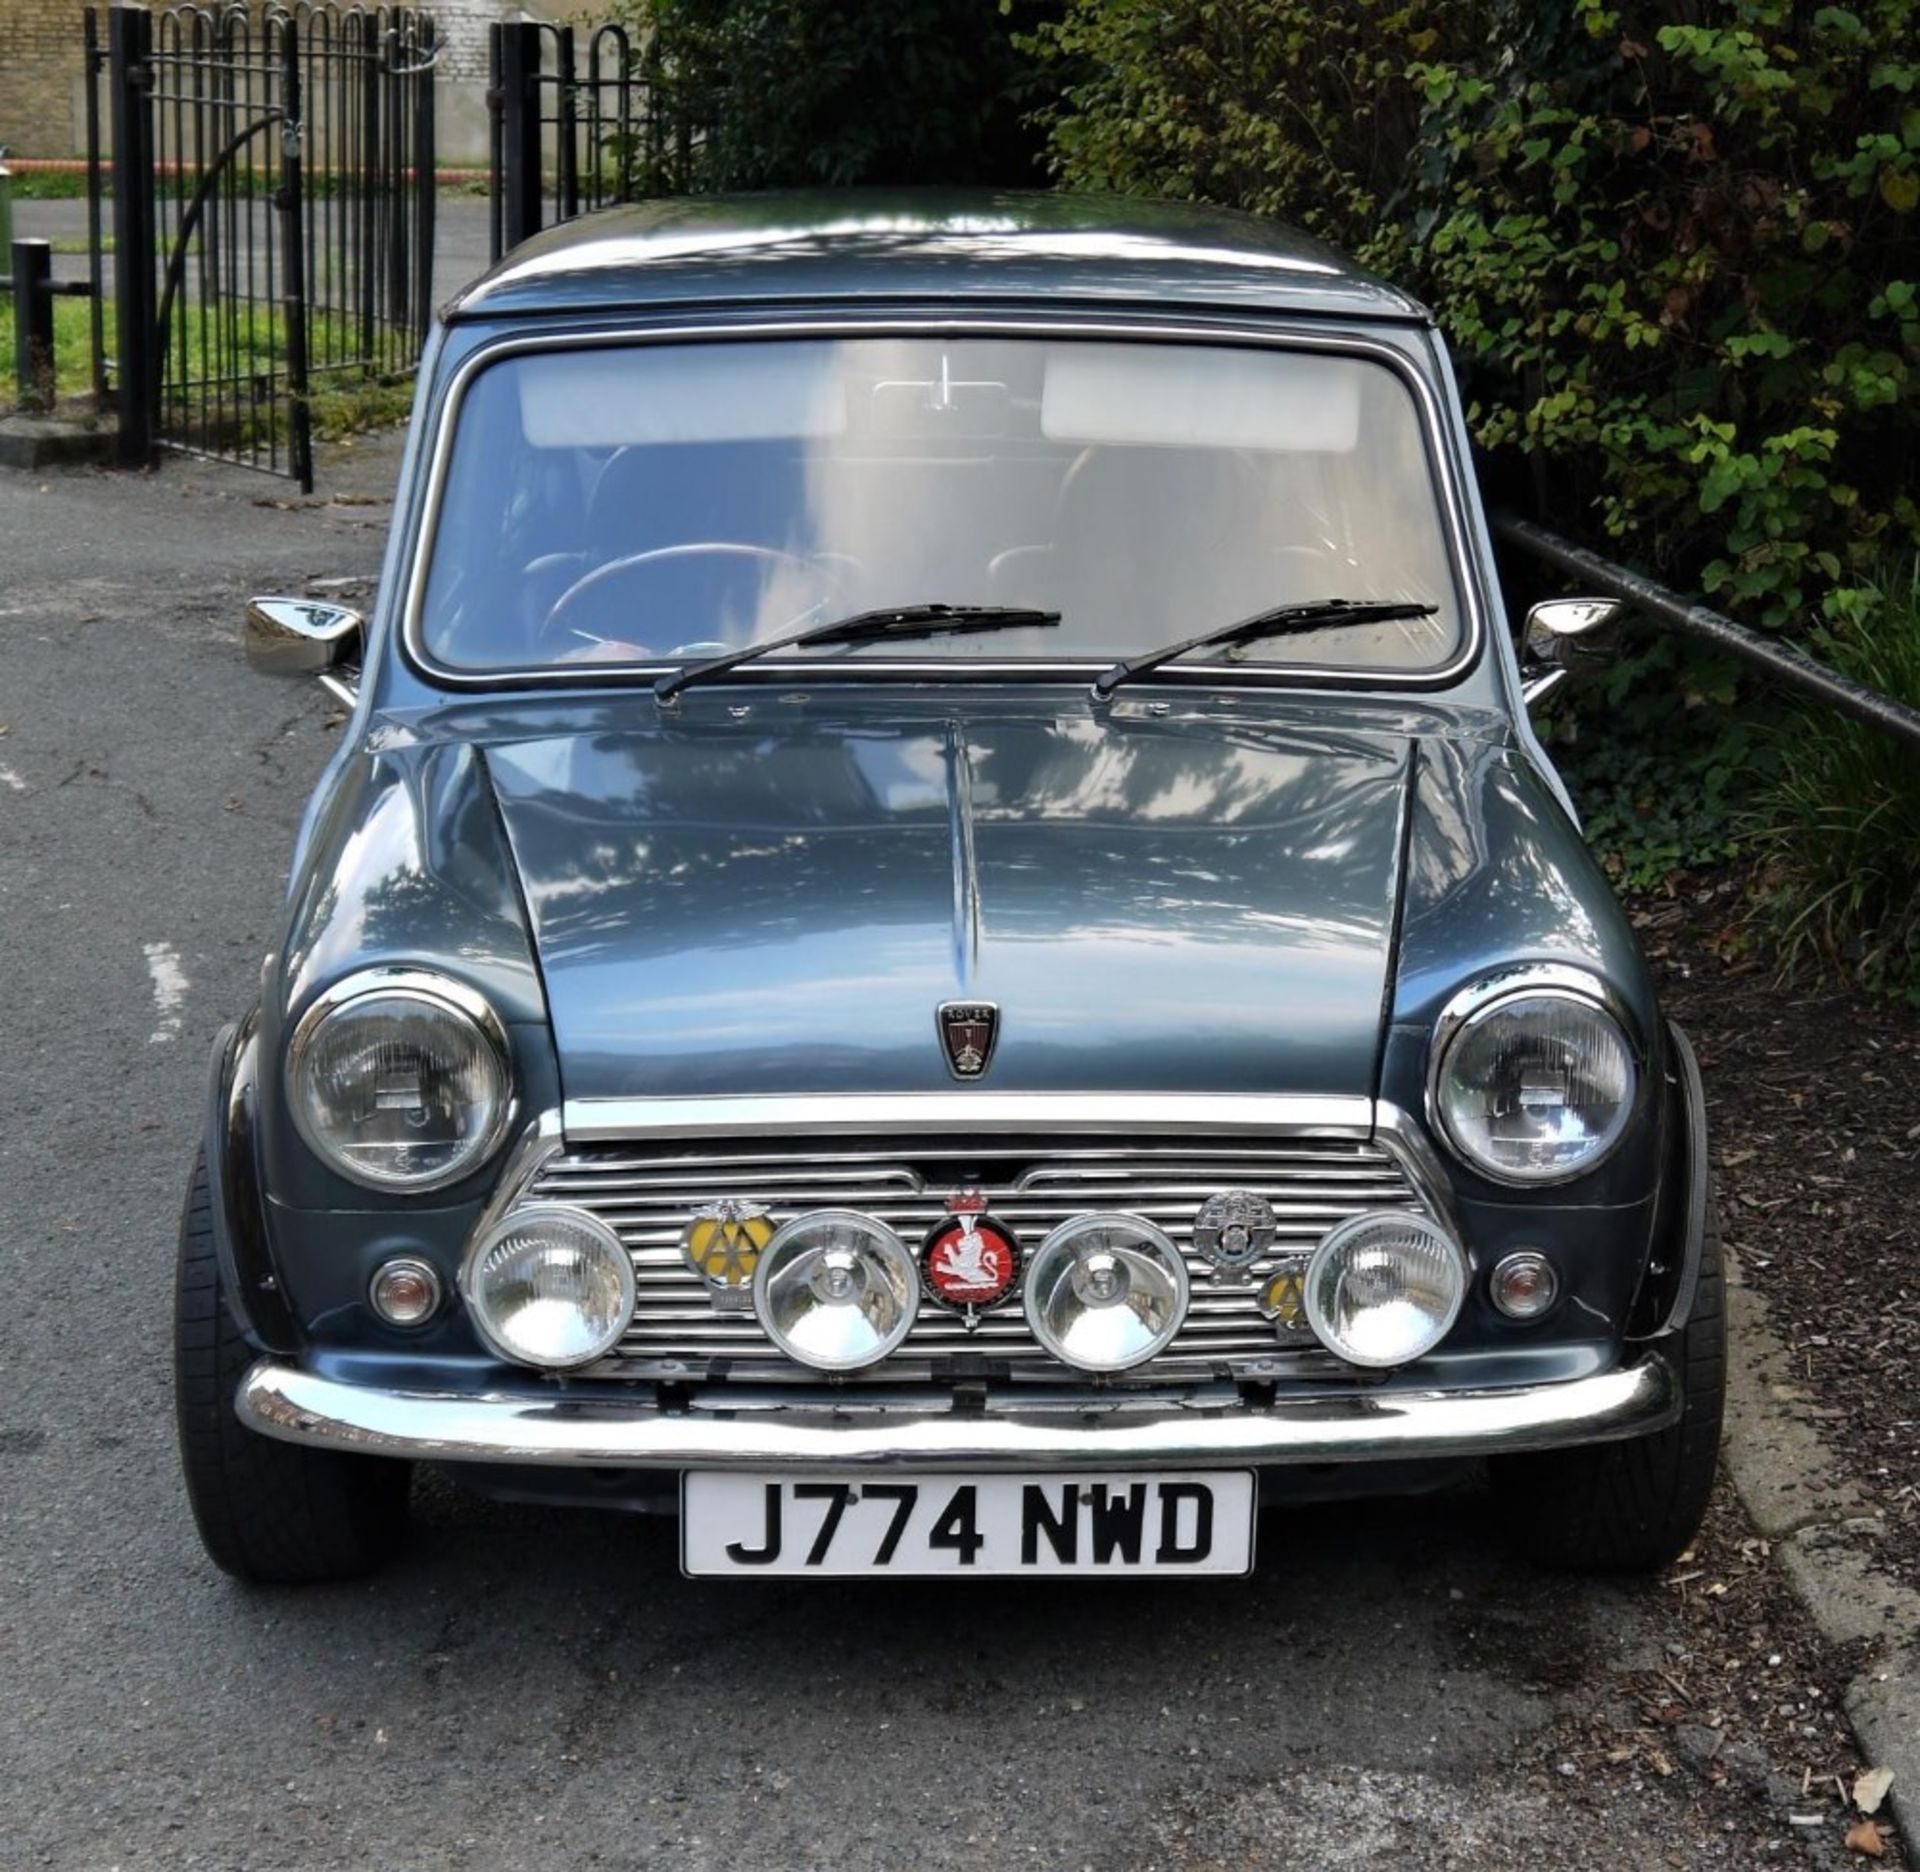 1991 ROVER MINI NEON Registration Number: J774 NWD Recorded Mileage: 58,000 miles Chassis Number: - Image 16 of 24